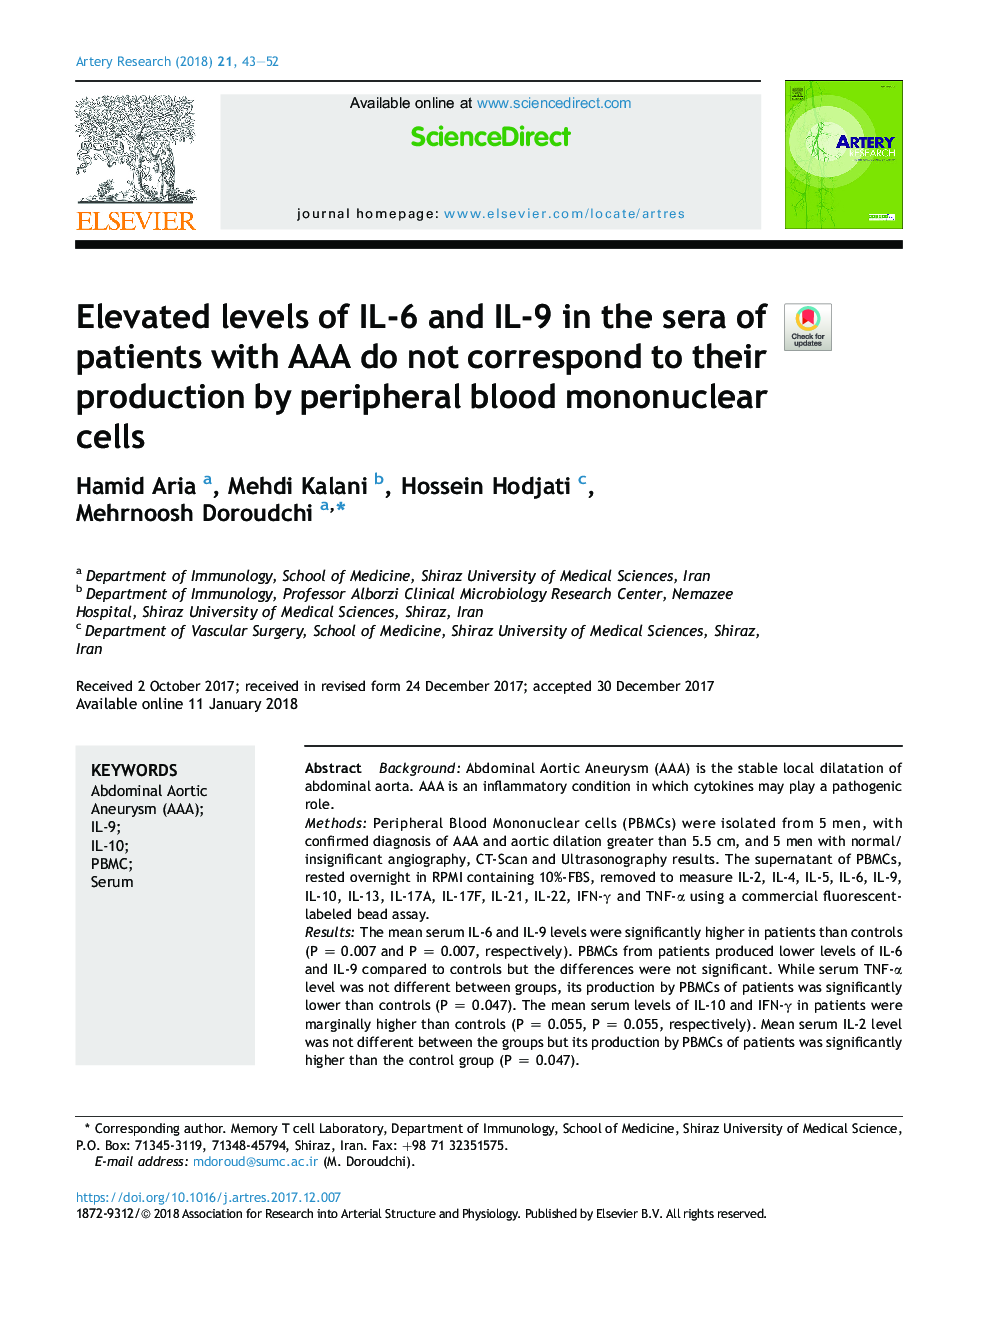 Elevated levels of IL-6 and IL-9 in the sera of patients with AAA do not correspond to their production by peripheral blood mononuclear cells